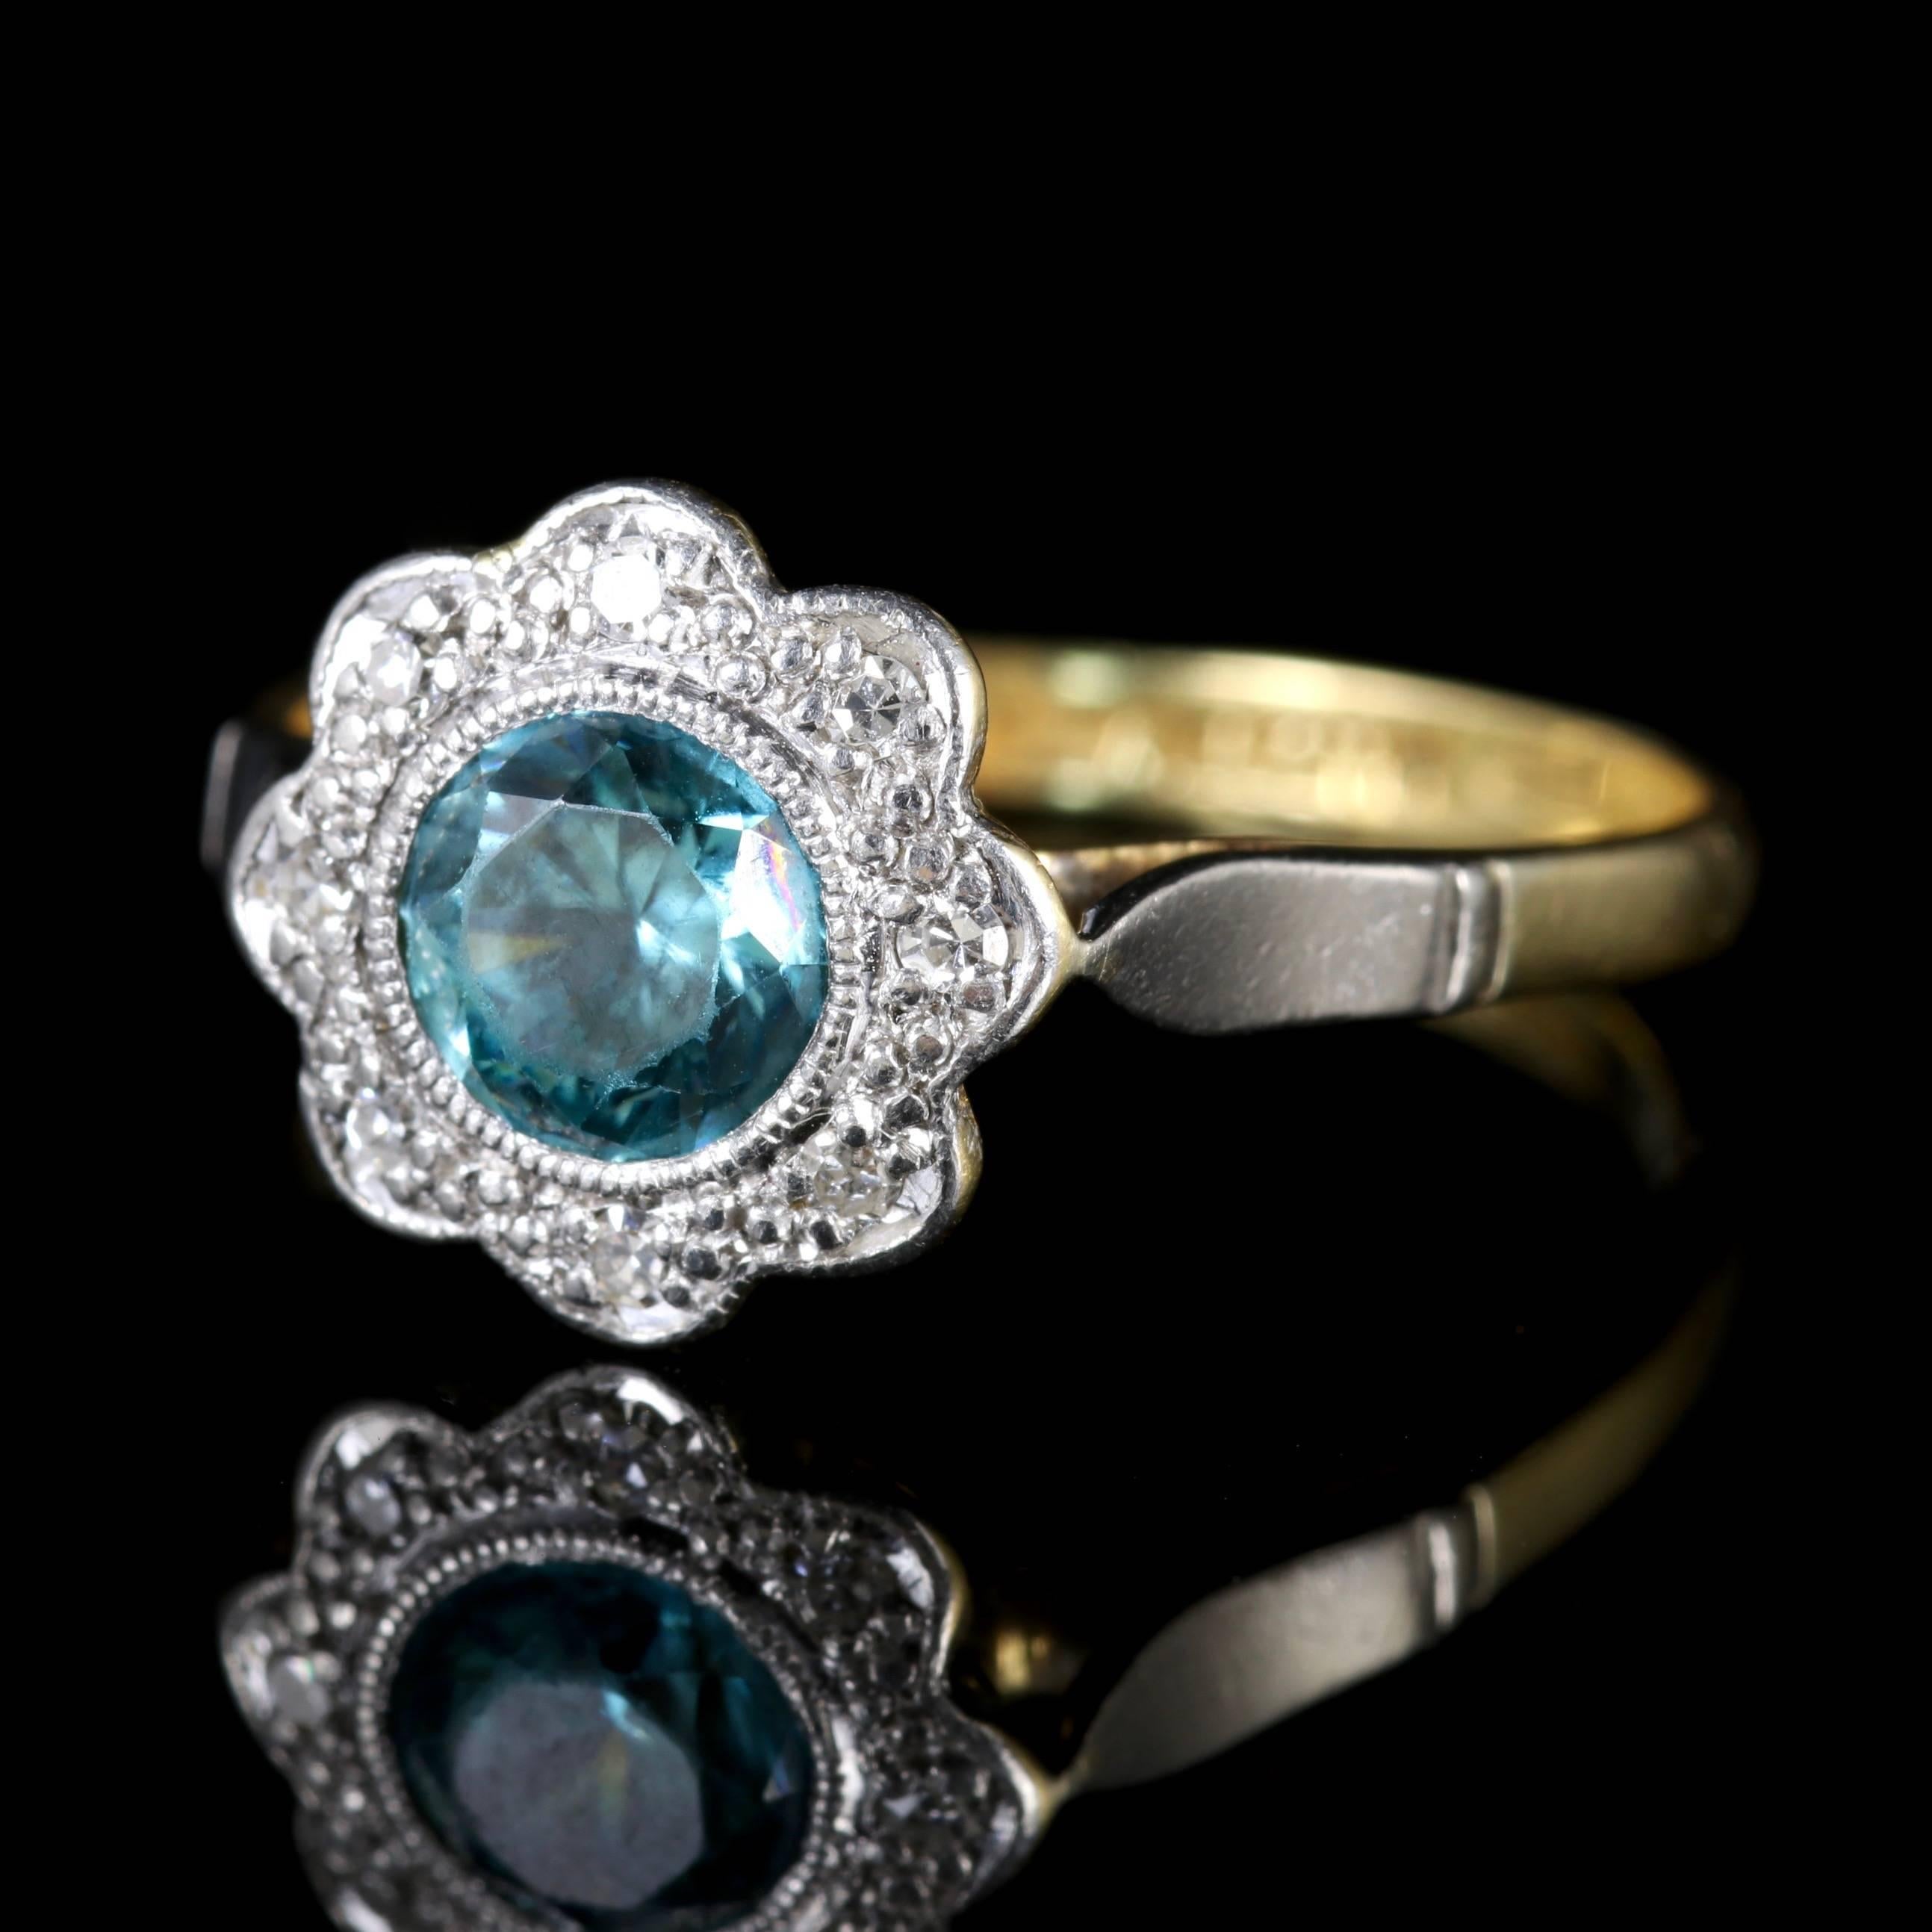 This wonderful Edwardian 18ct Yellow Gold and Platinum ring boasts a Blue Zircon and lovely Diamonds, Circa 1915.

The Blue Zircon is approx. 70 points surrounded by old cut Diamonds.

Blue Zircons have an intense energy that is highly spiritual.